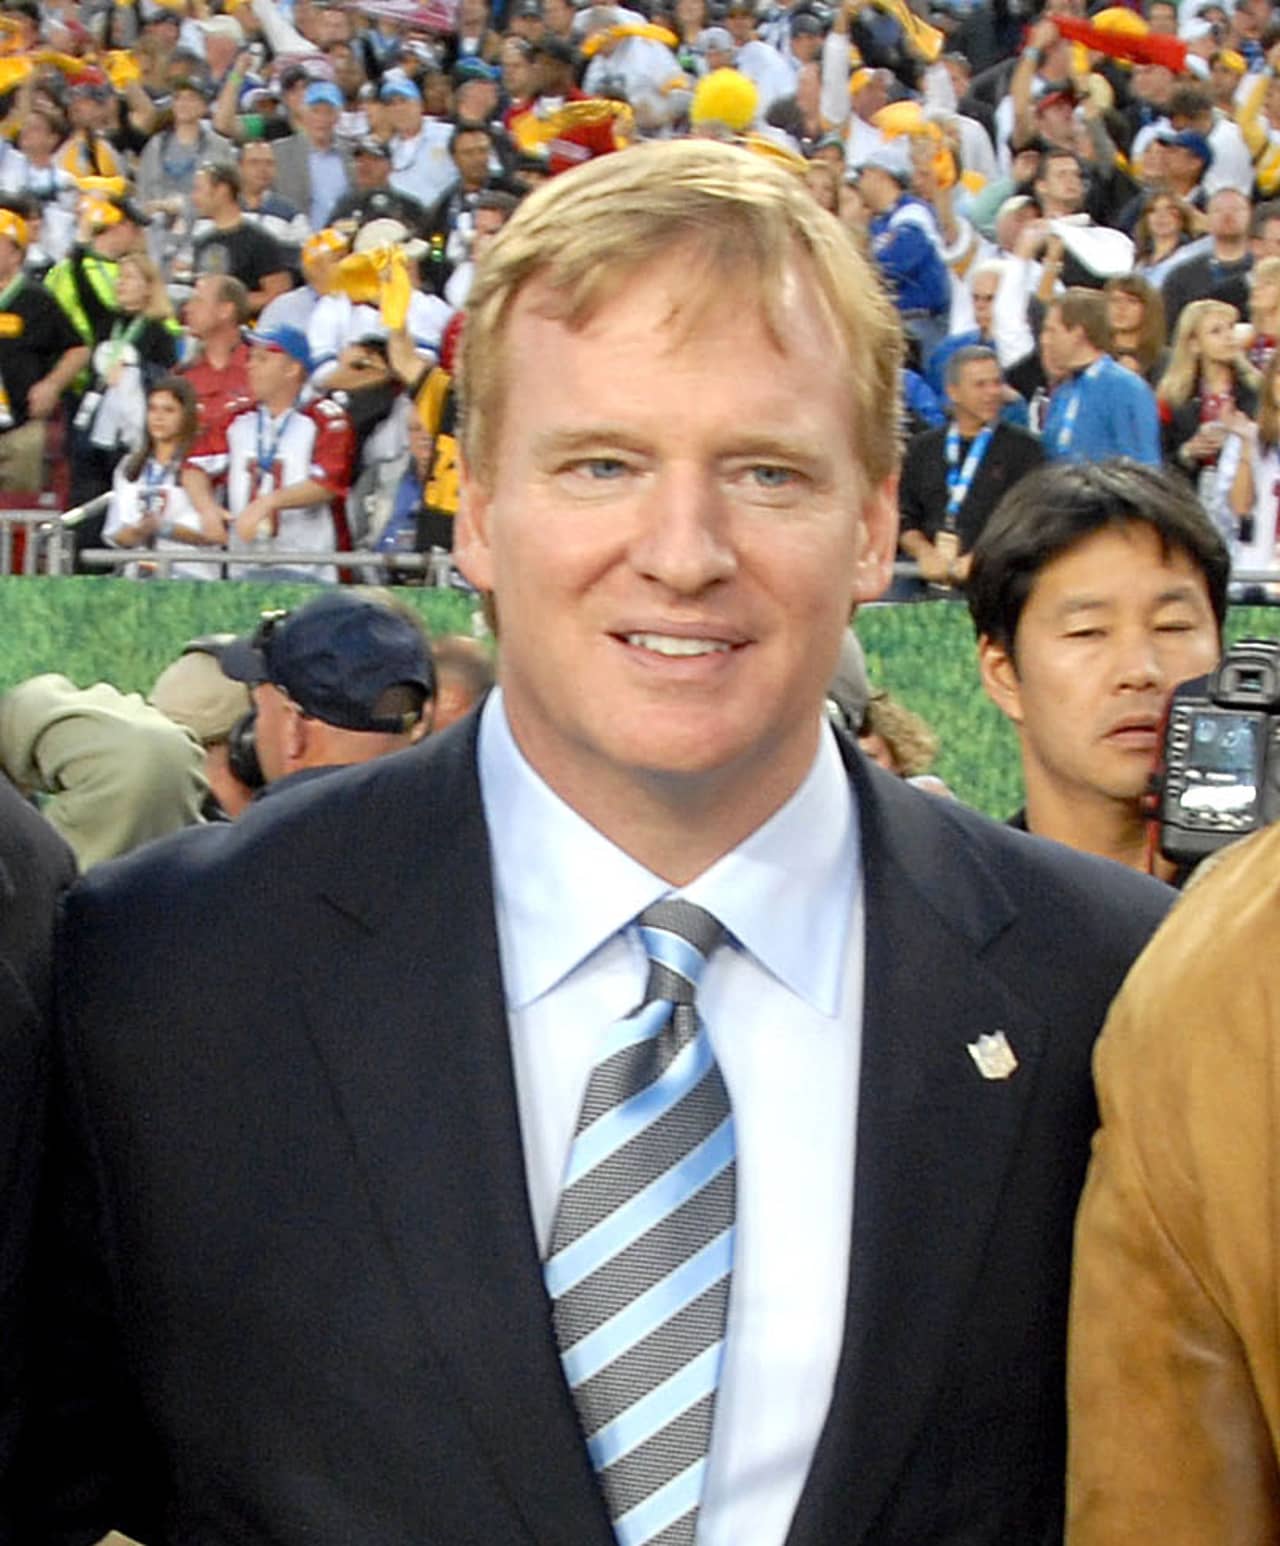 NFL Commissioner Roger Goodell will visit the Fairfield Giants Youth Football program Wednesday.